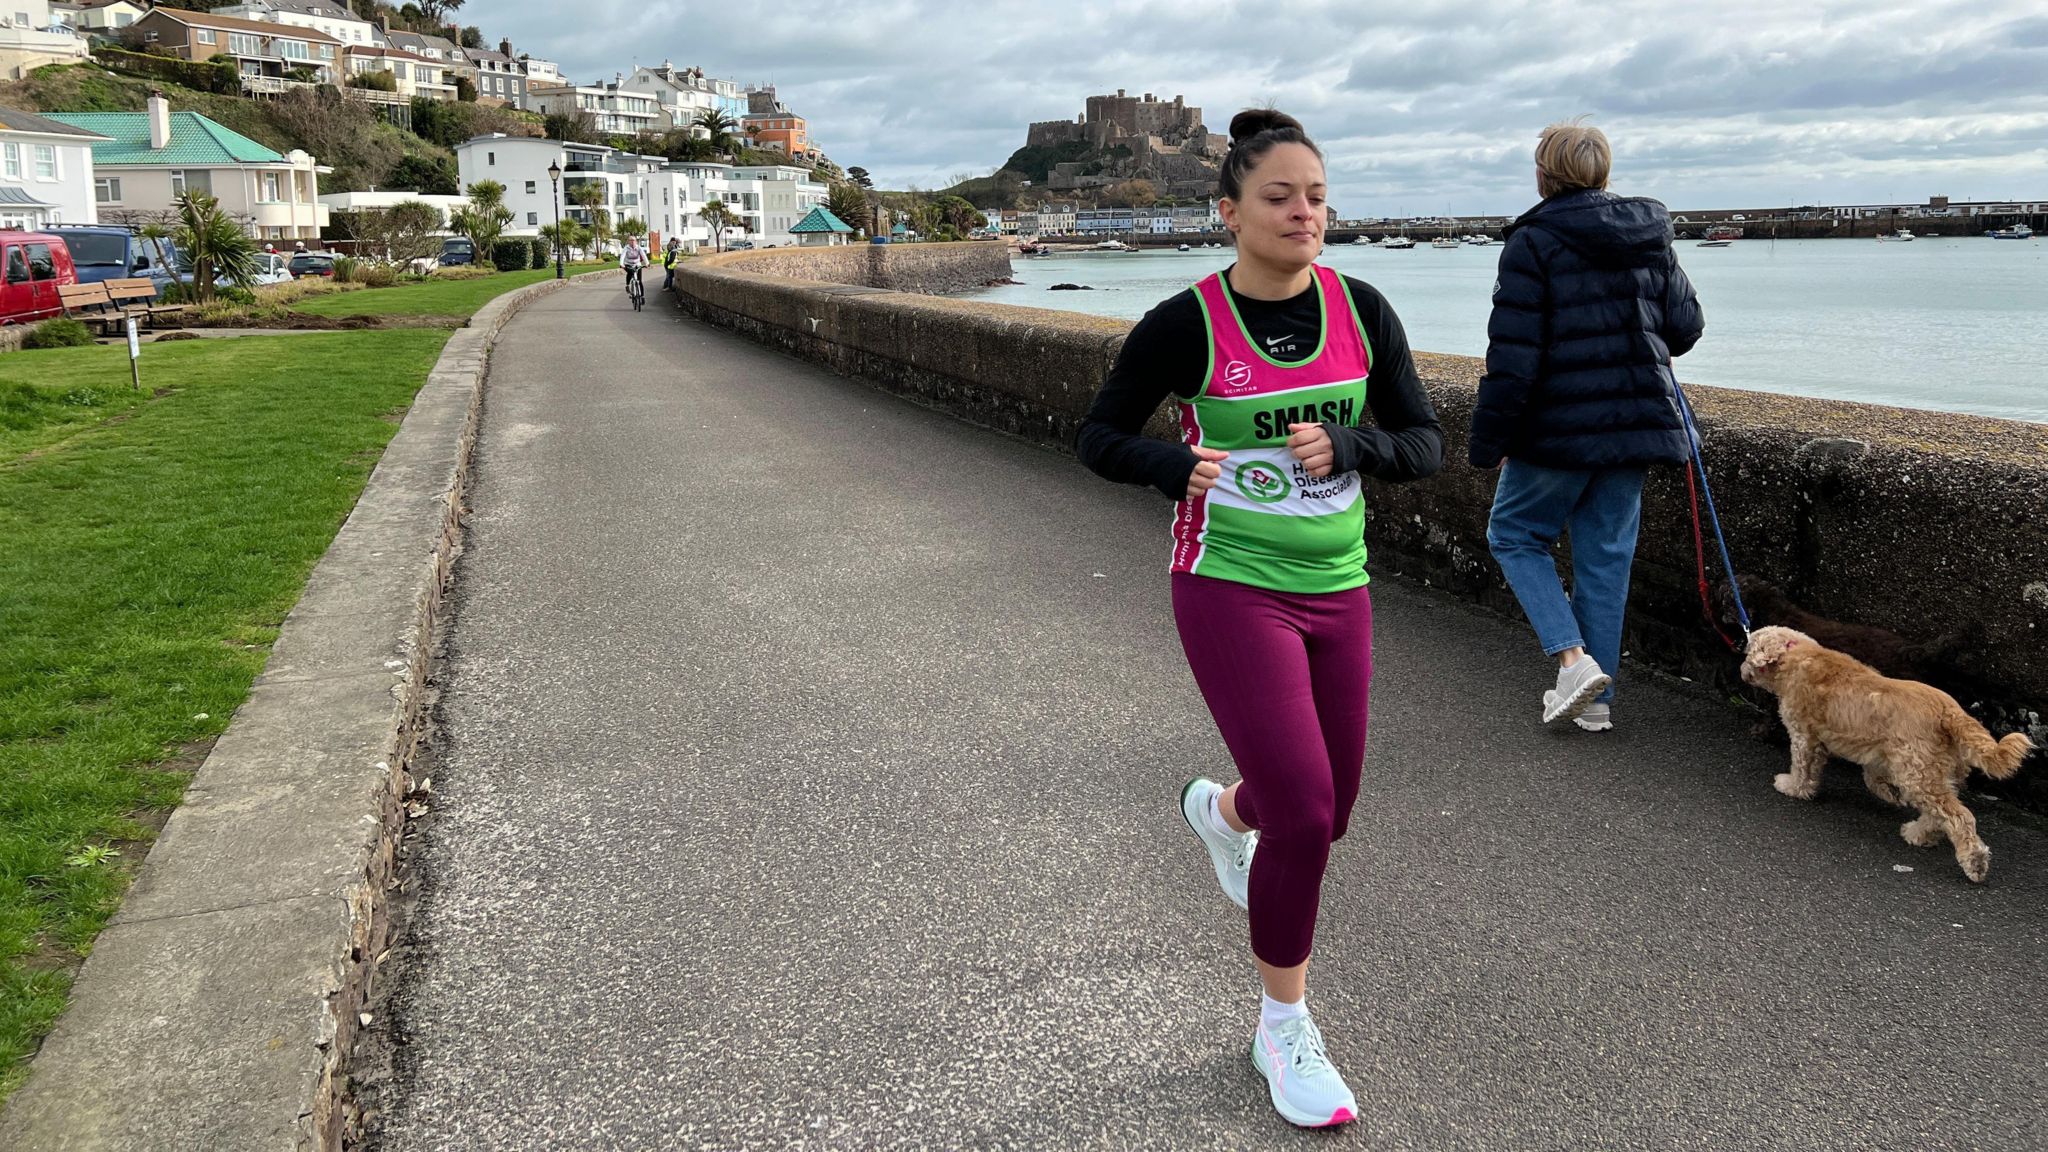 Ashley runs along the coast in Jersey going past a dog walker and there is a castle in the background